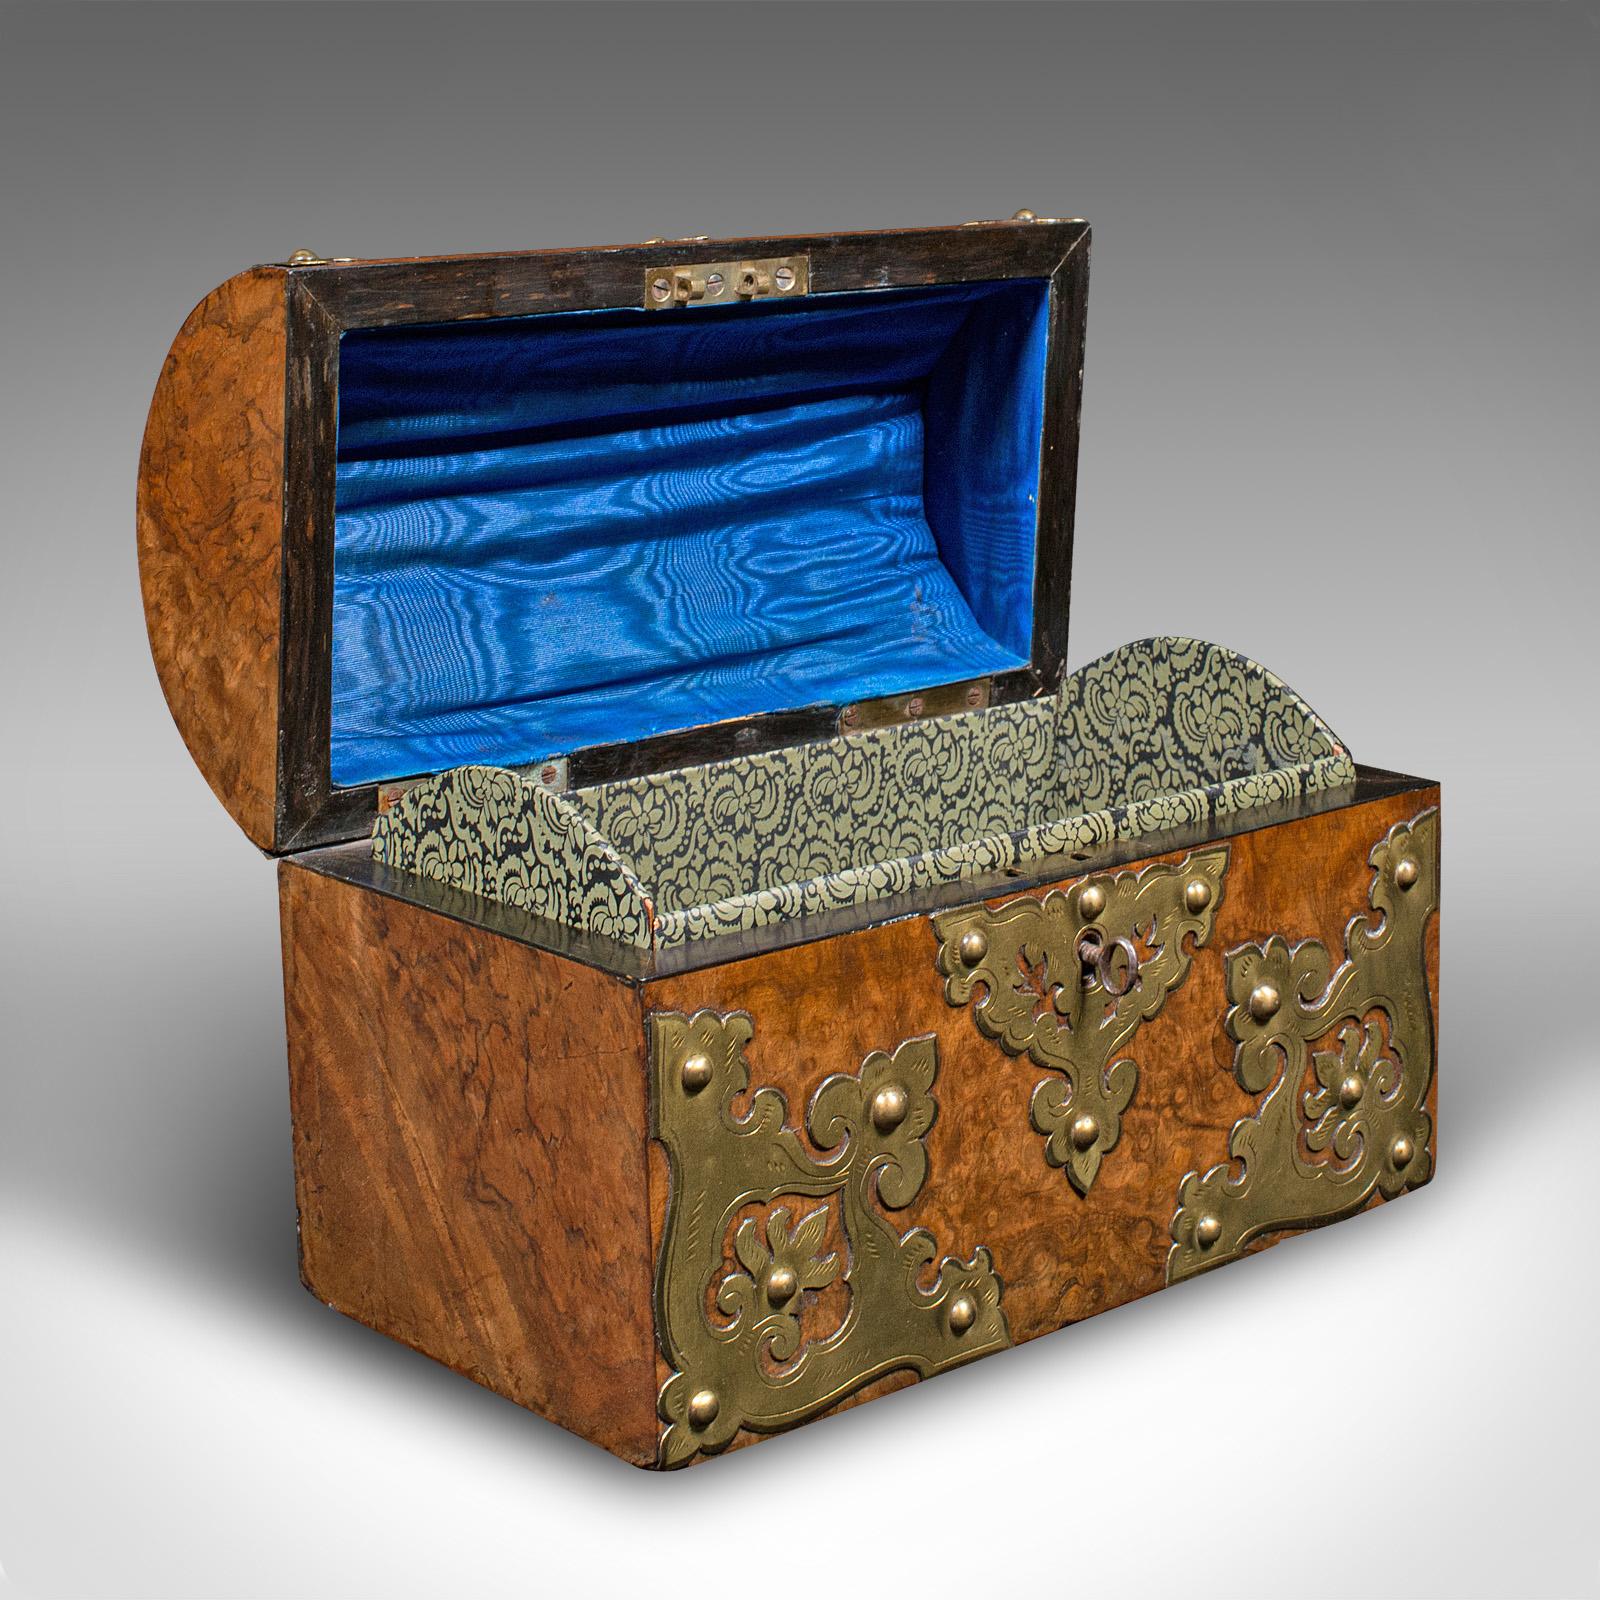 This is an antique domed top caddy. An English, burr walnut and brass keepsake box or dressing table case, dating to the Victorian period, circa 1870.

Of captivating form and superb decorative appeal
Displays a desirable aged patina and in good